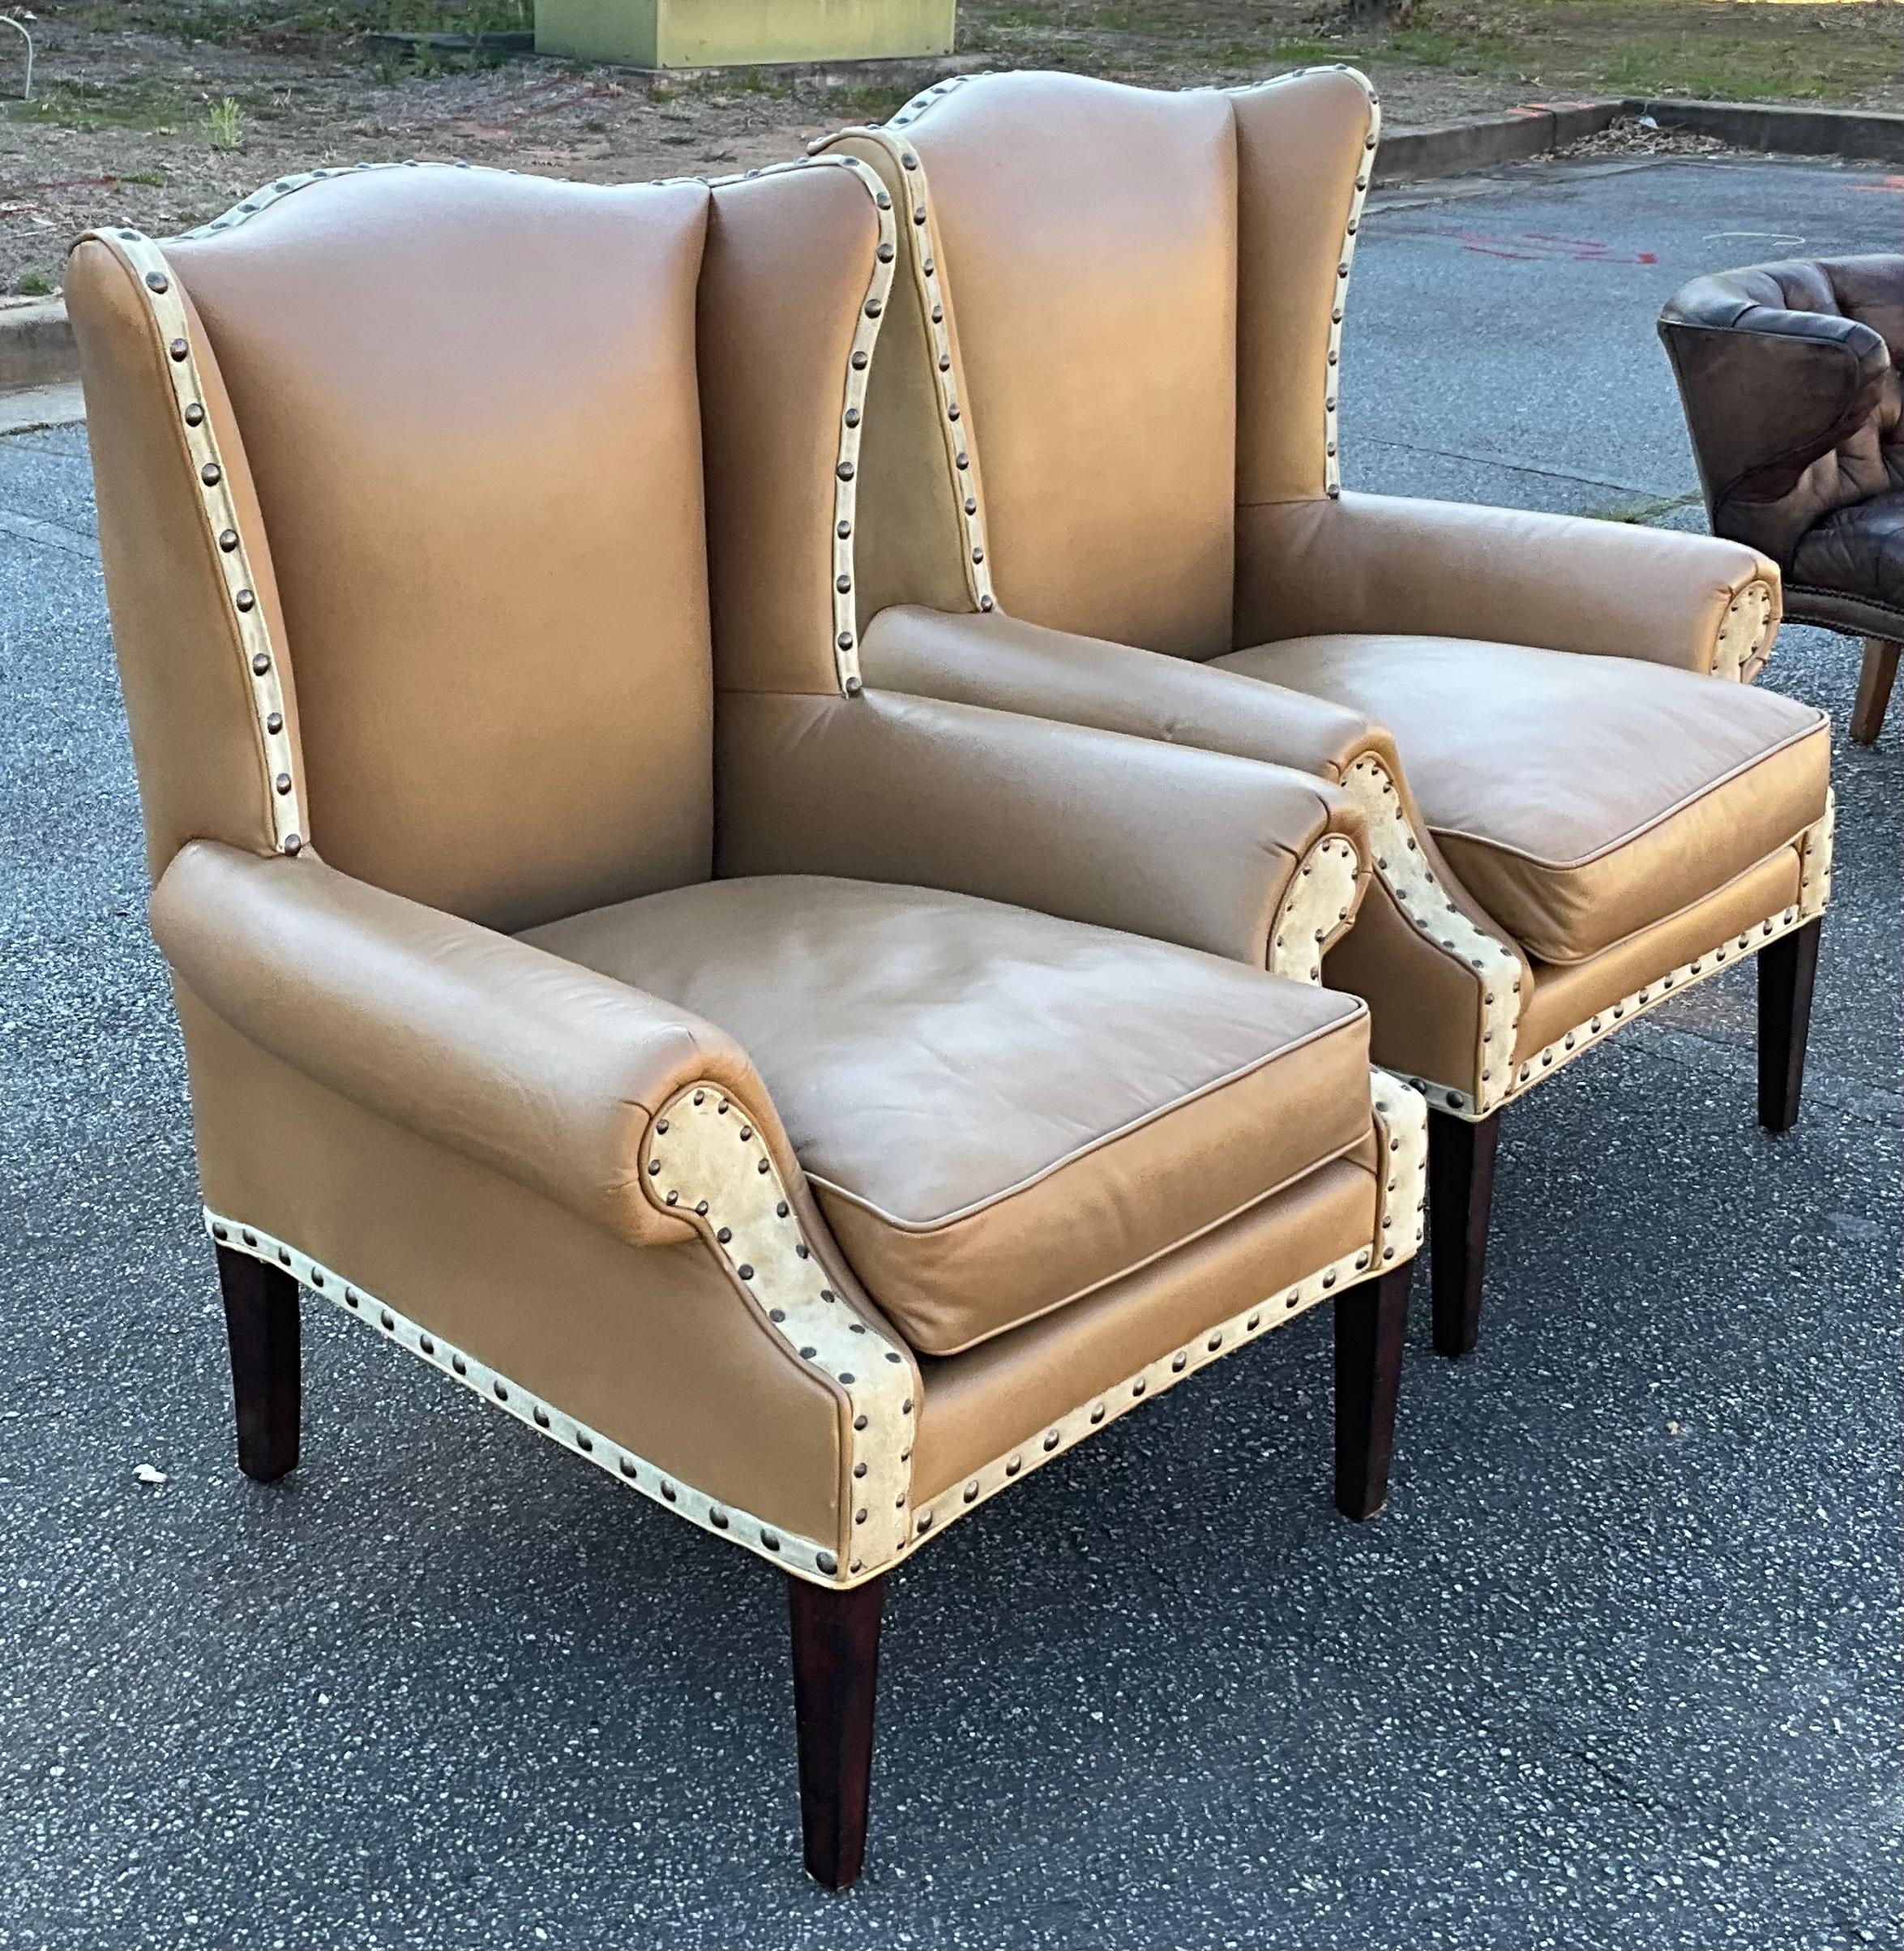 This is a pair of leather and suede wingback chairs designed by Barclay Butera for Baker Furniture Company. They are in very good condition with lite wear. They are marked and date to 2010.

Shipping is running a little slower than usual.